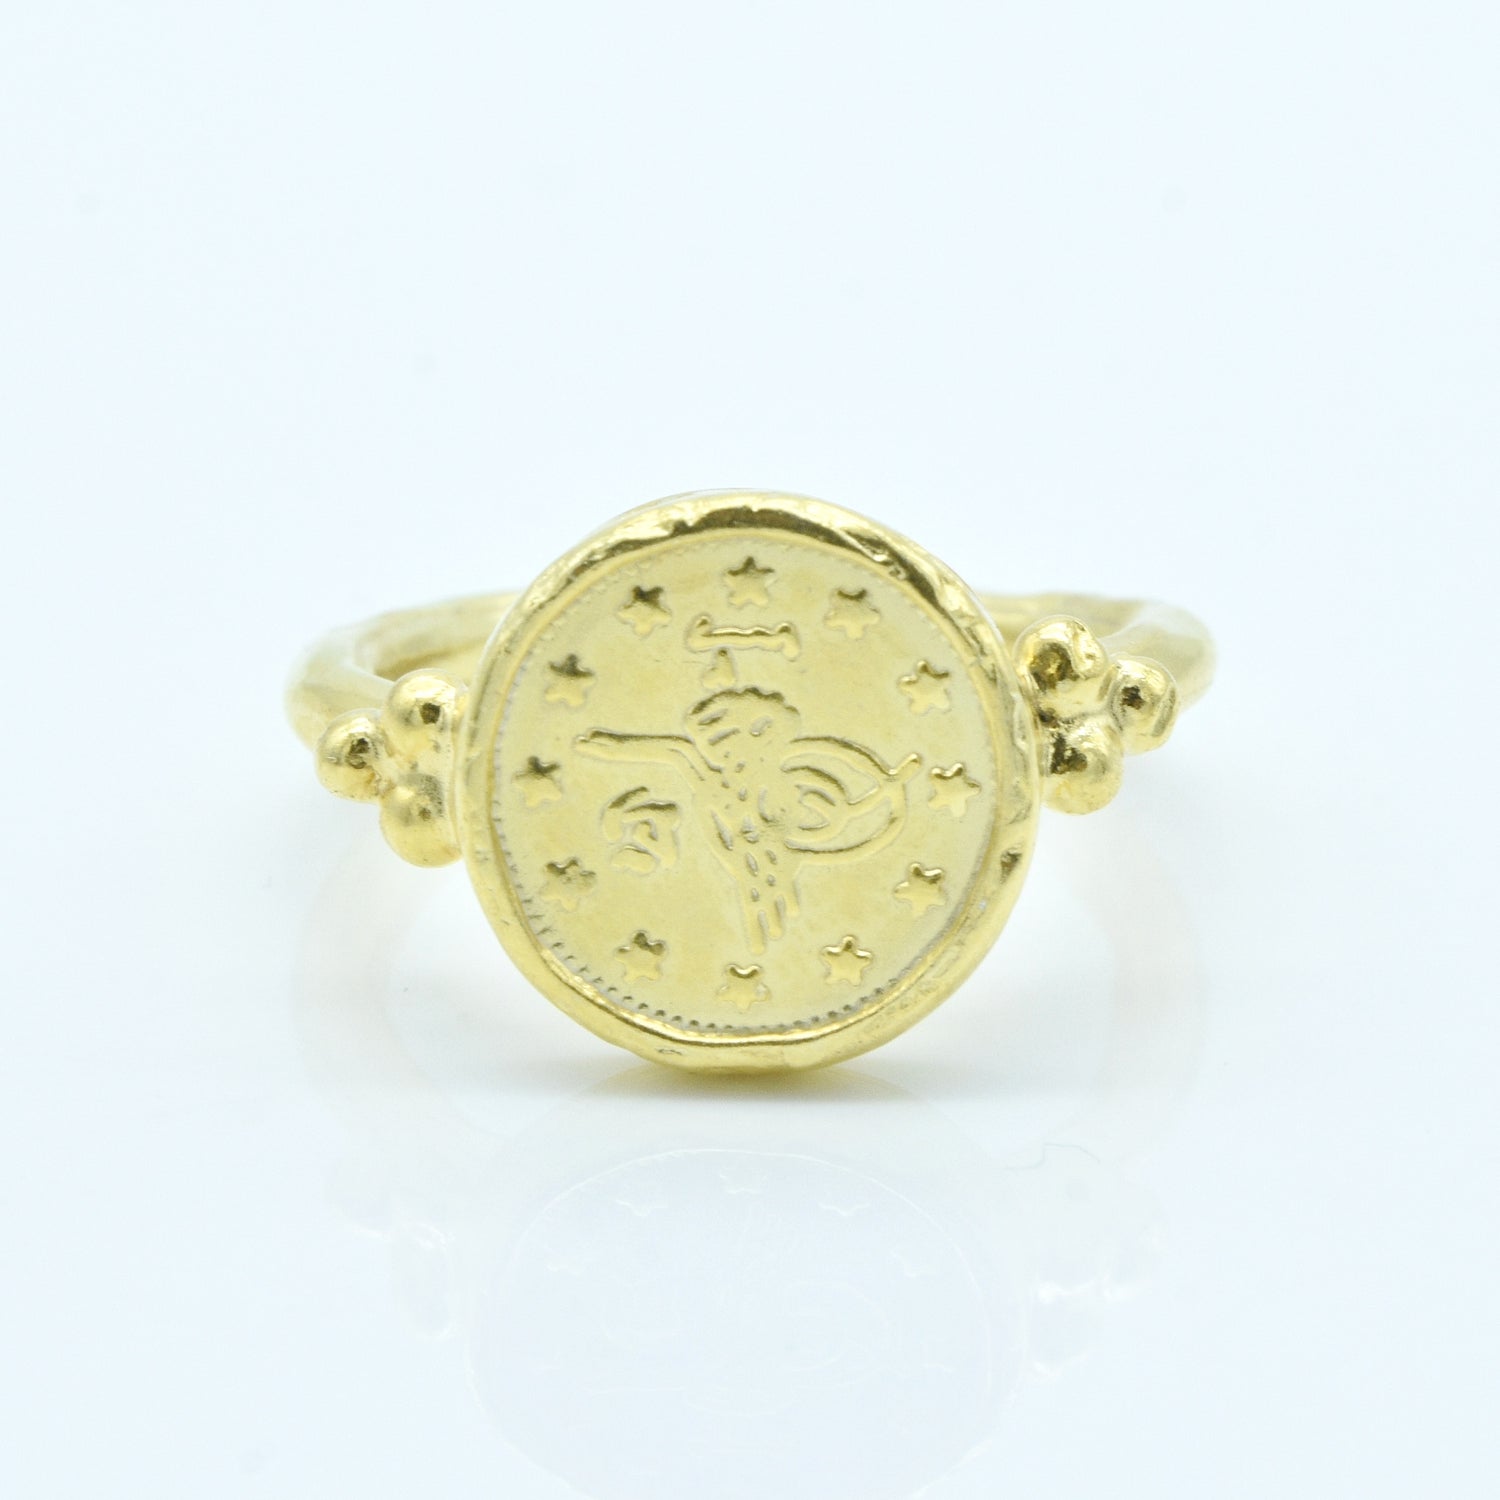 Aylas Arabic Calligraphy ring - 21ct Gold plated 925 silver - Handmade in Ottoman Style by Artisan